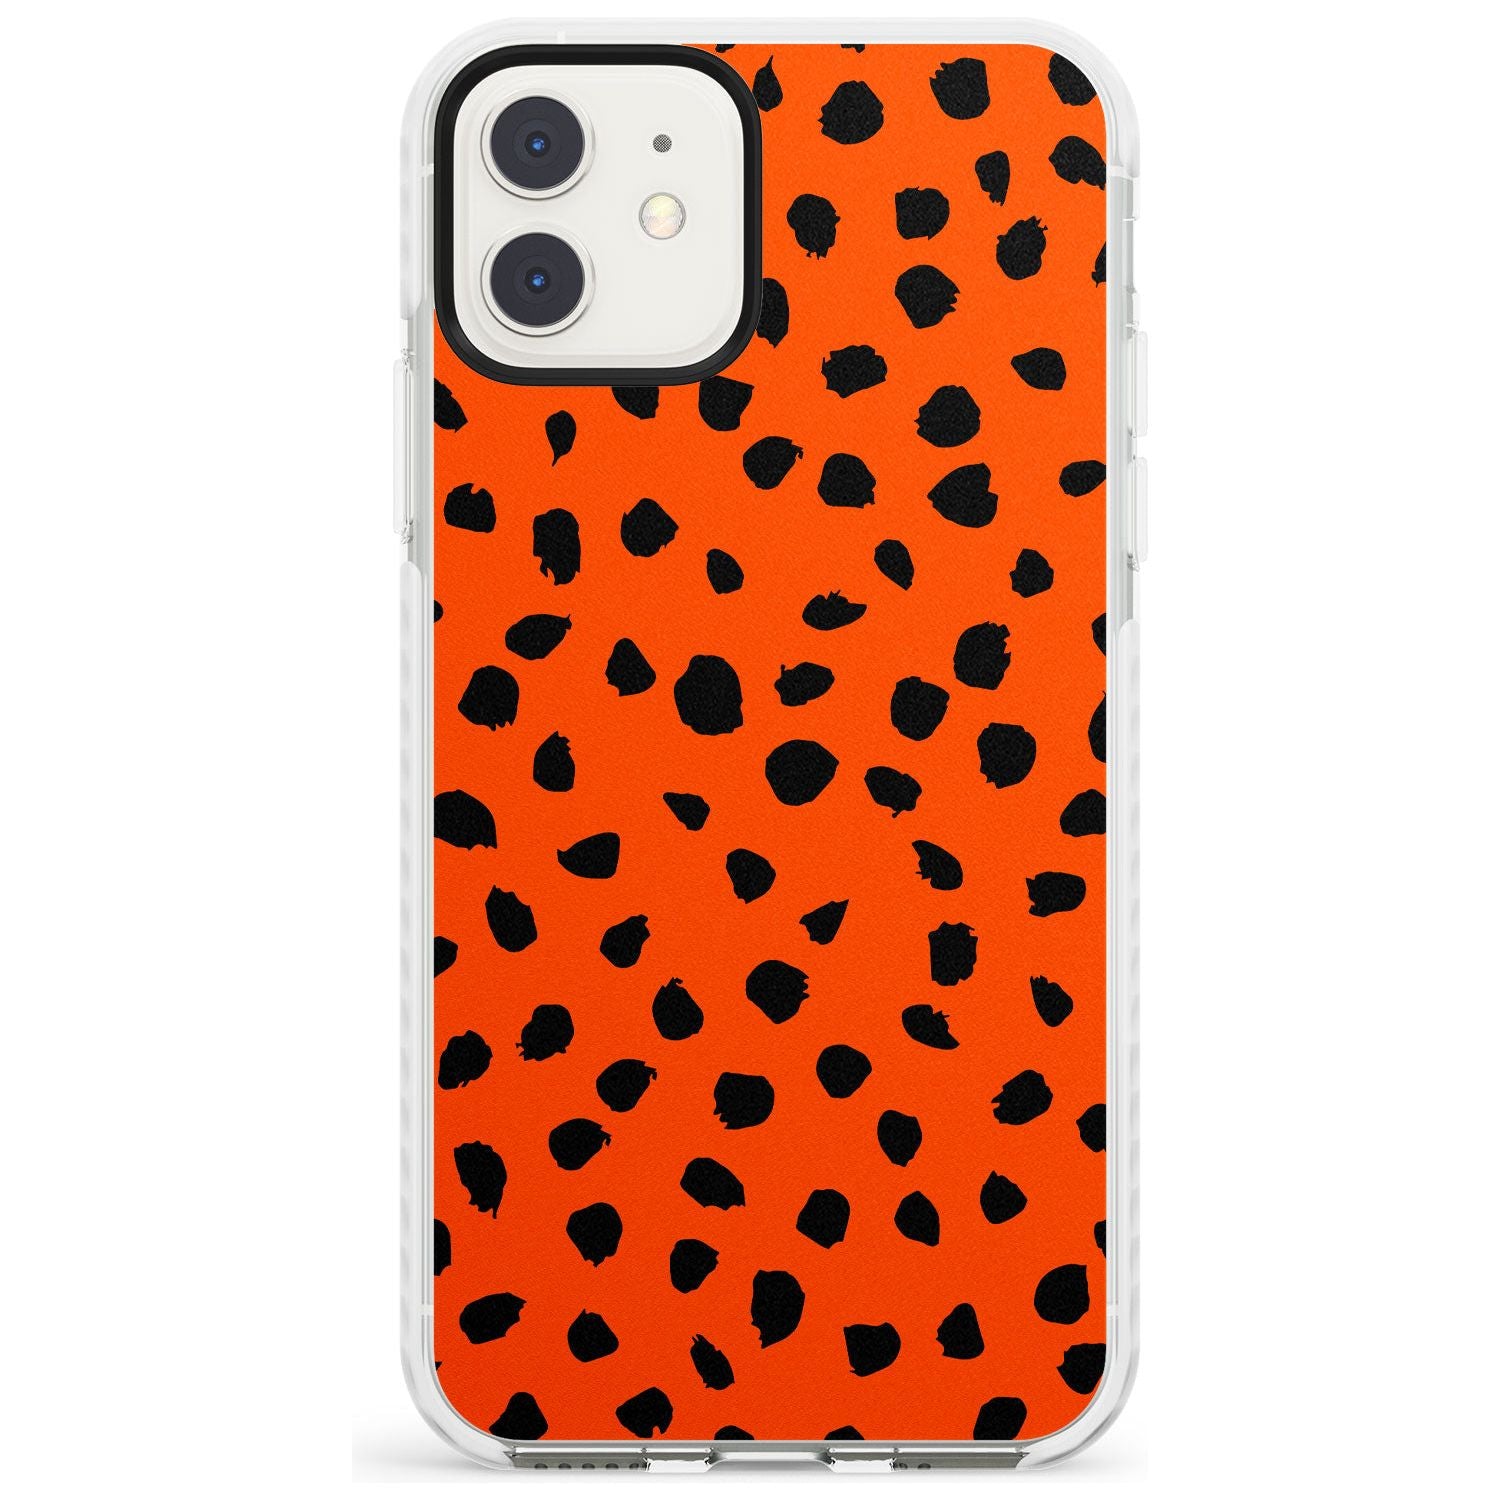 Black & Bright Red Dalmatian Polka Dot Spots Impact Phone Case for iPhone 11